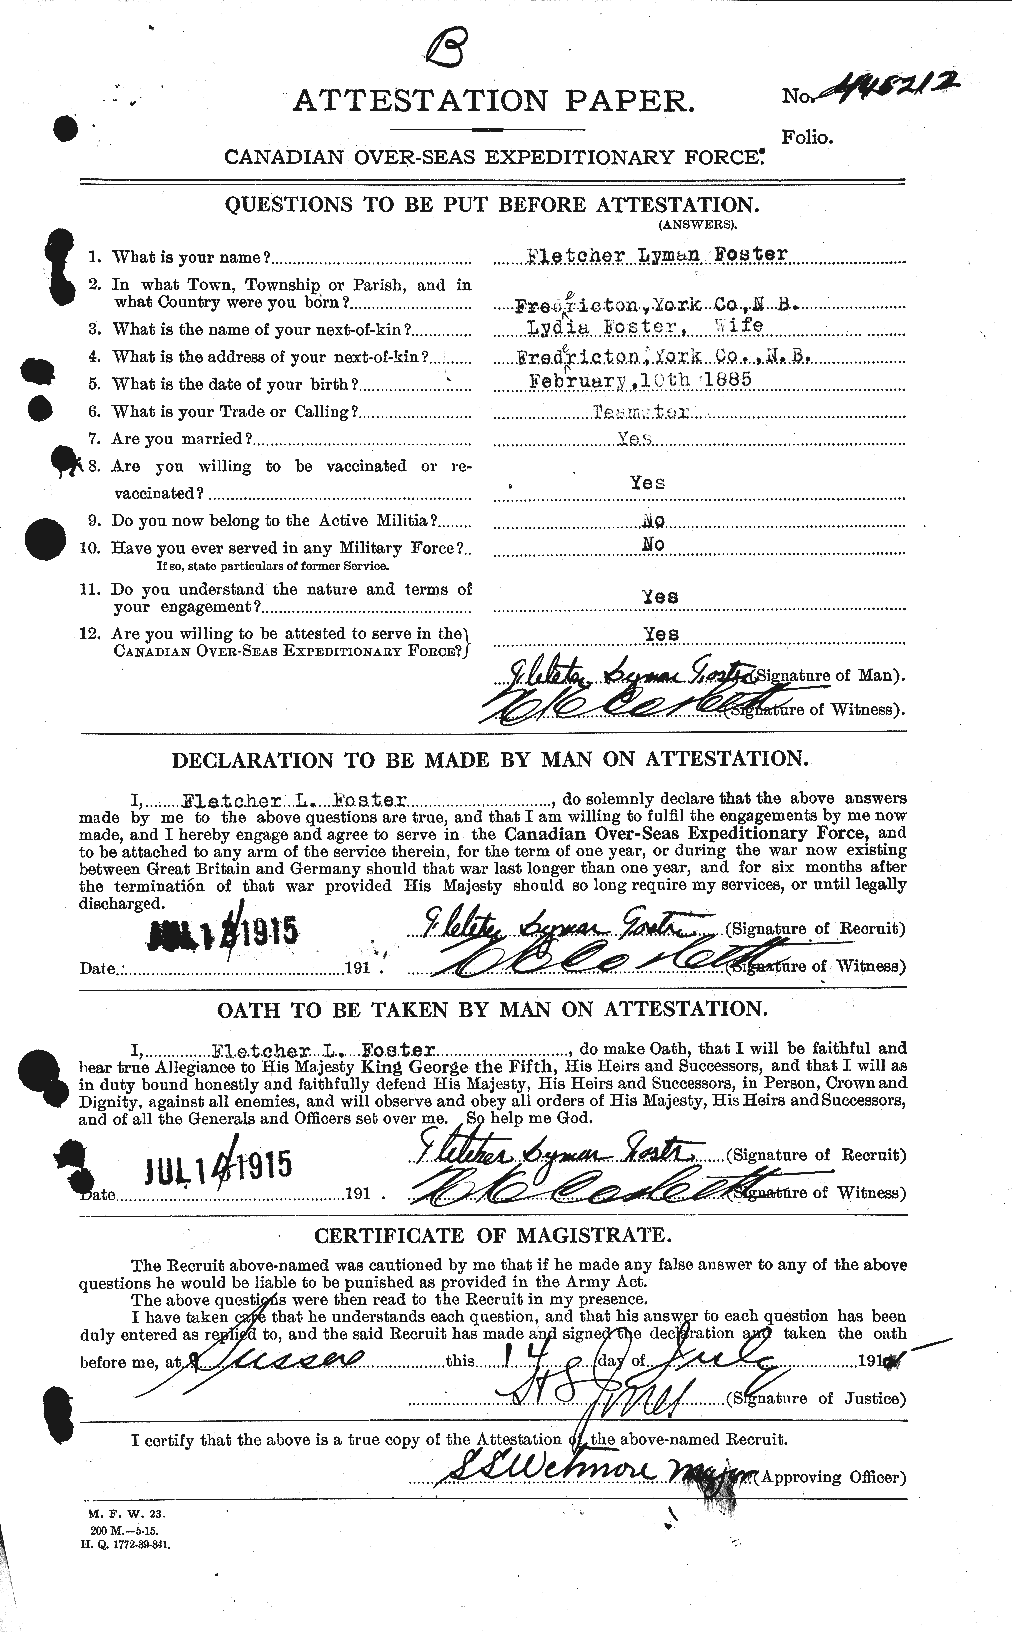 Personnel Records of the First World War - CEF 330610a